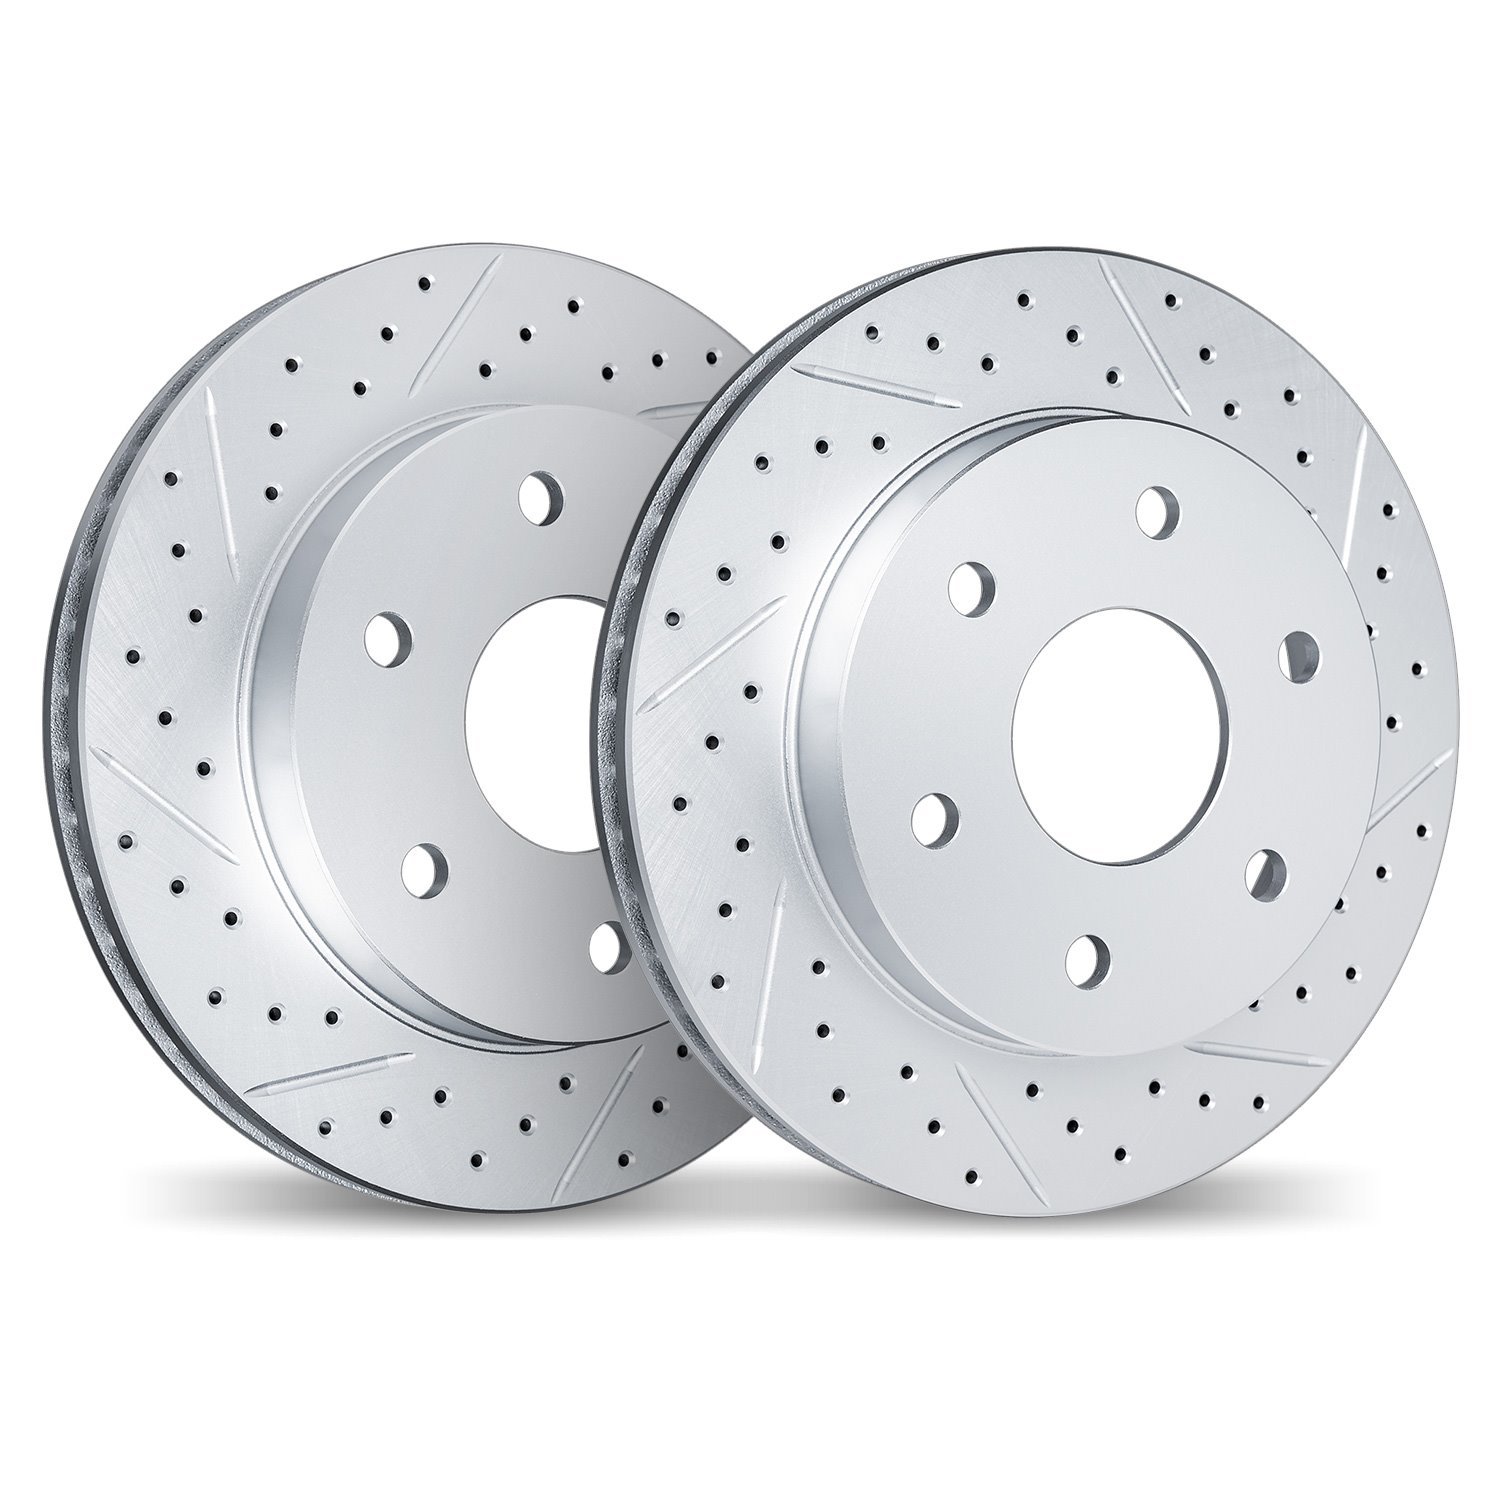 2002-47026 Geoperformance Drilled/Slotted Brake Rotors, Fits Select GM, Position: Front